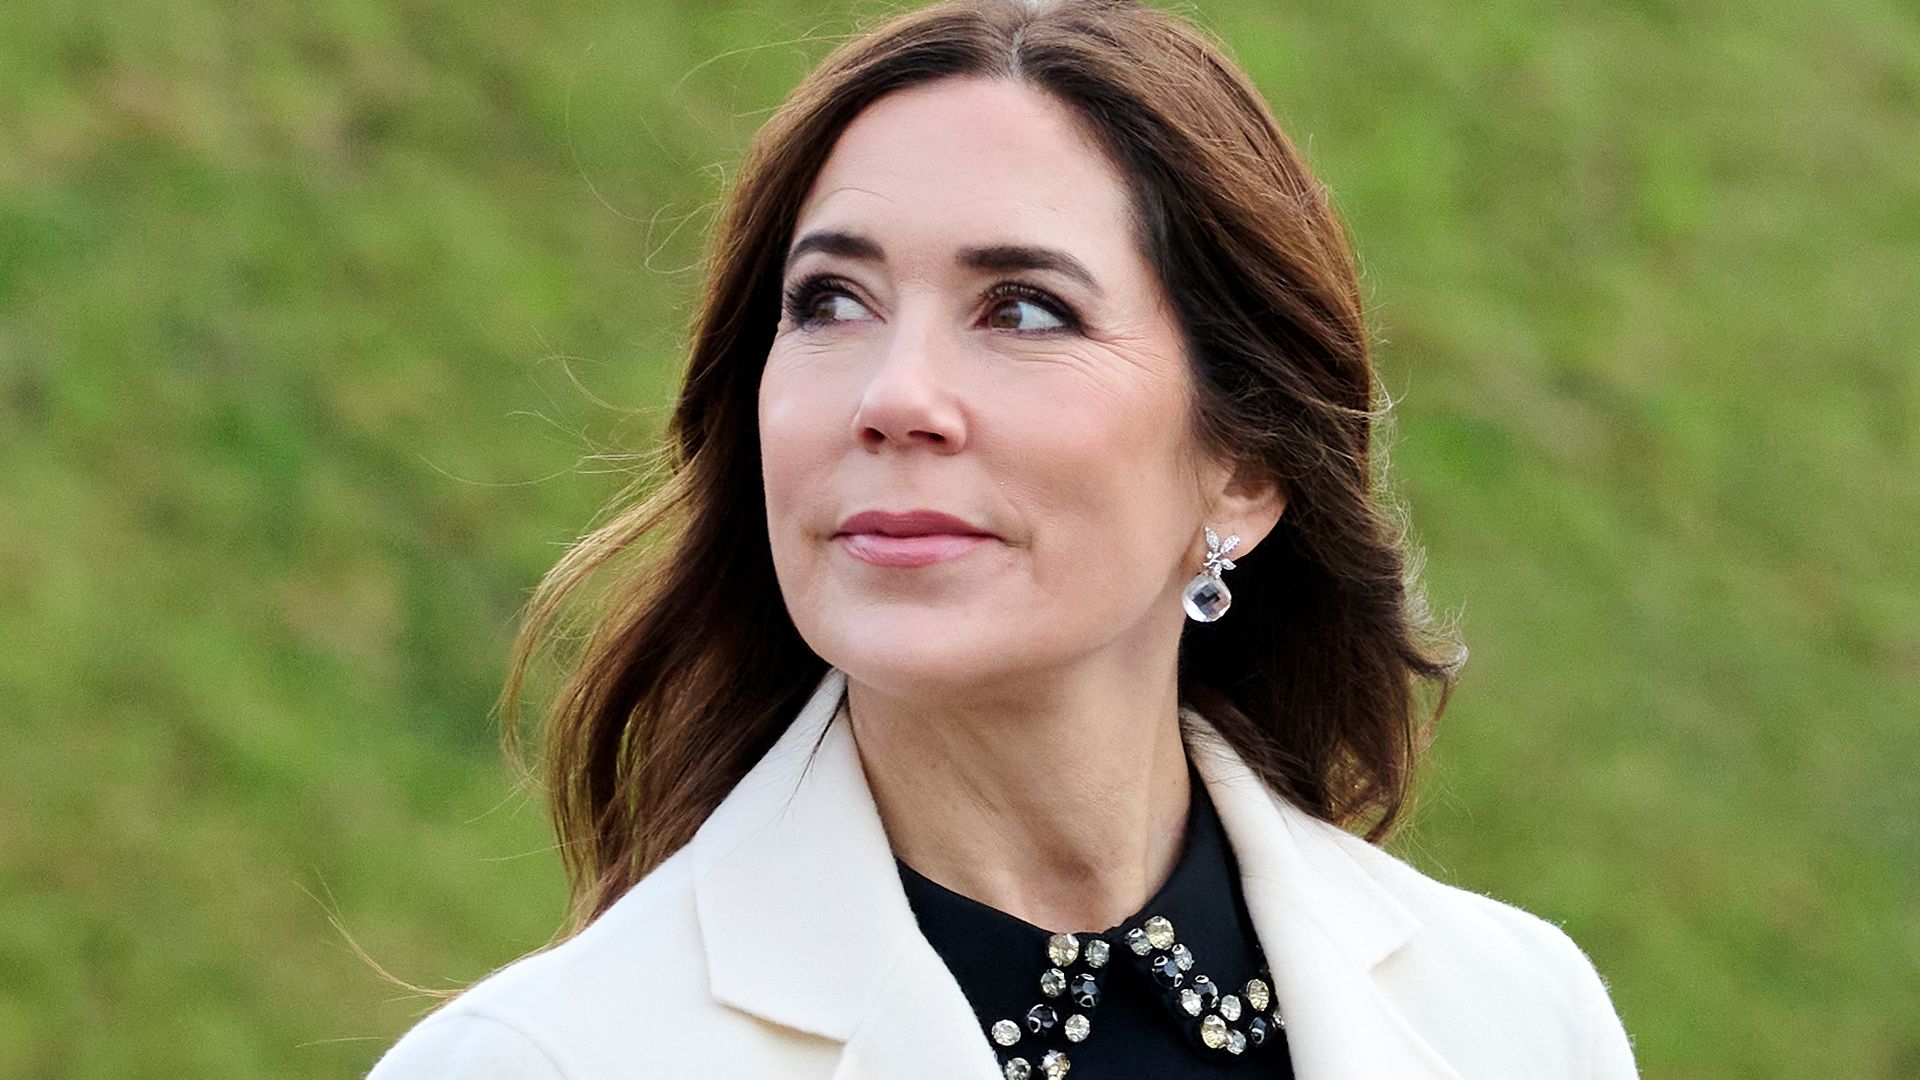 Crown Princess Mary wearing white coat with black embellished blouse